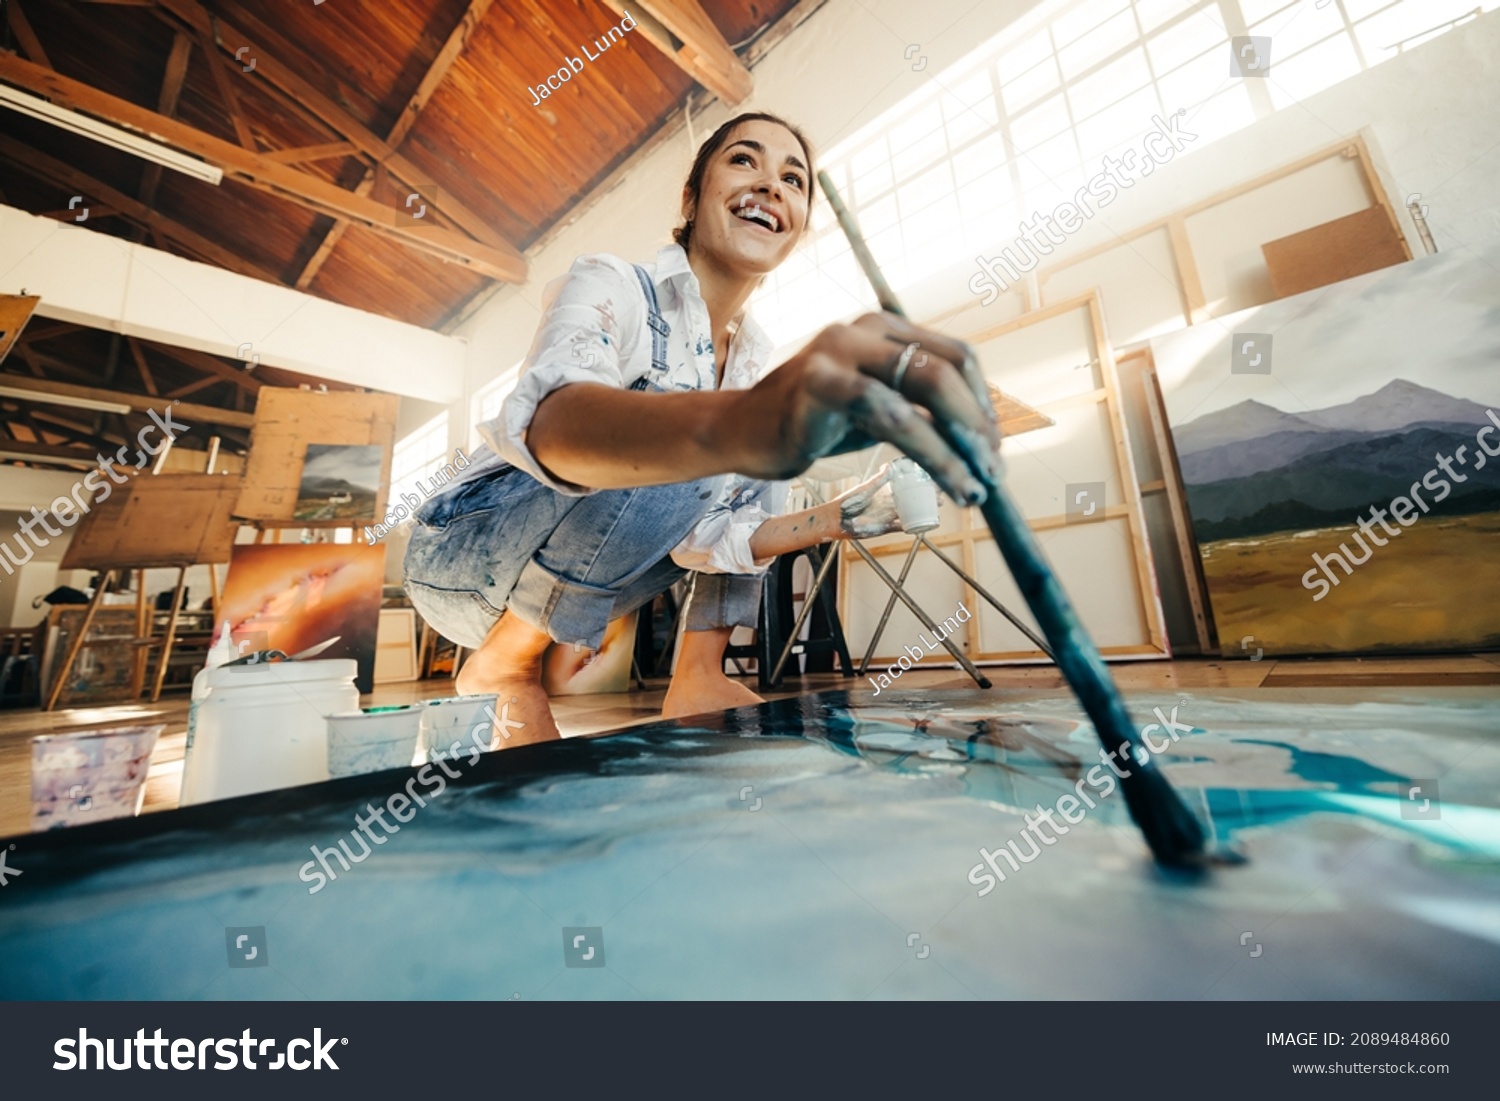 Innovative young artist painting on a large canvas in her studio. Happy female artist looking away cheerfully while working on a new artwork. Smiling woman working on the floor in her atelier. #2089484860